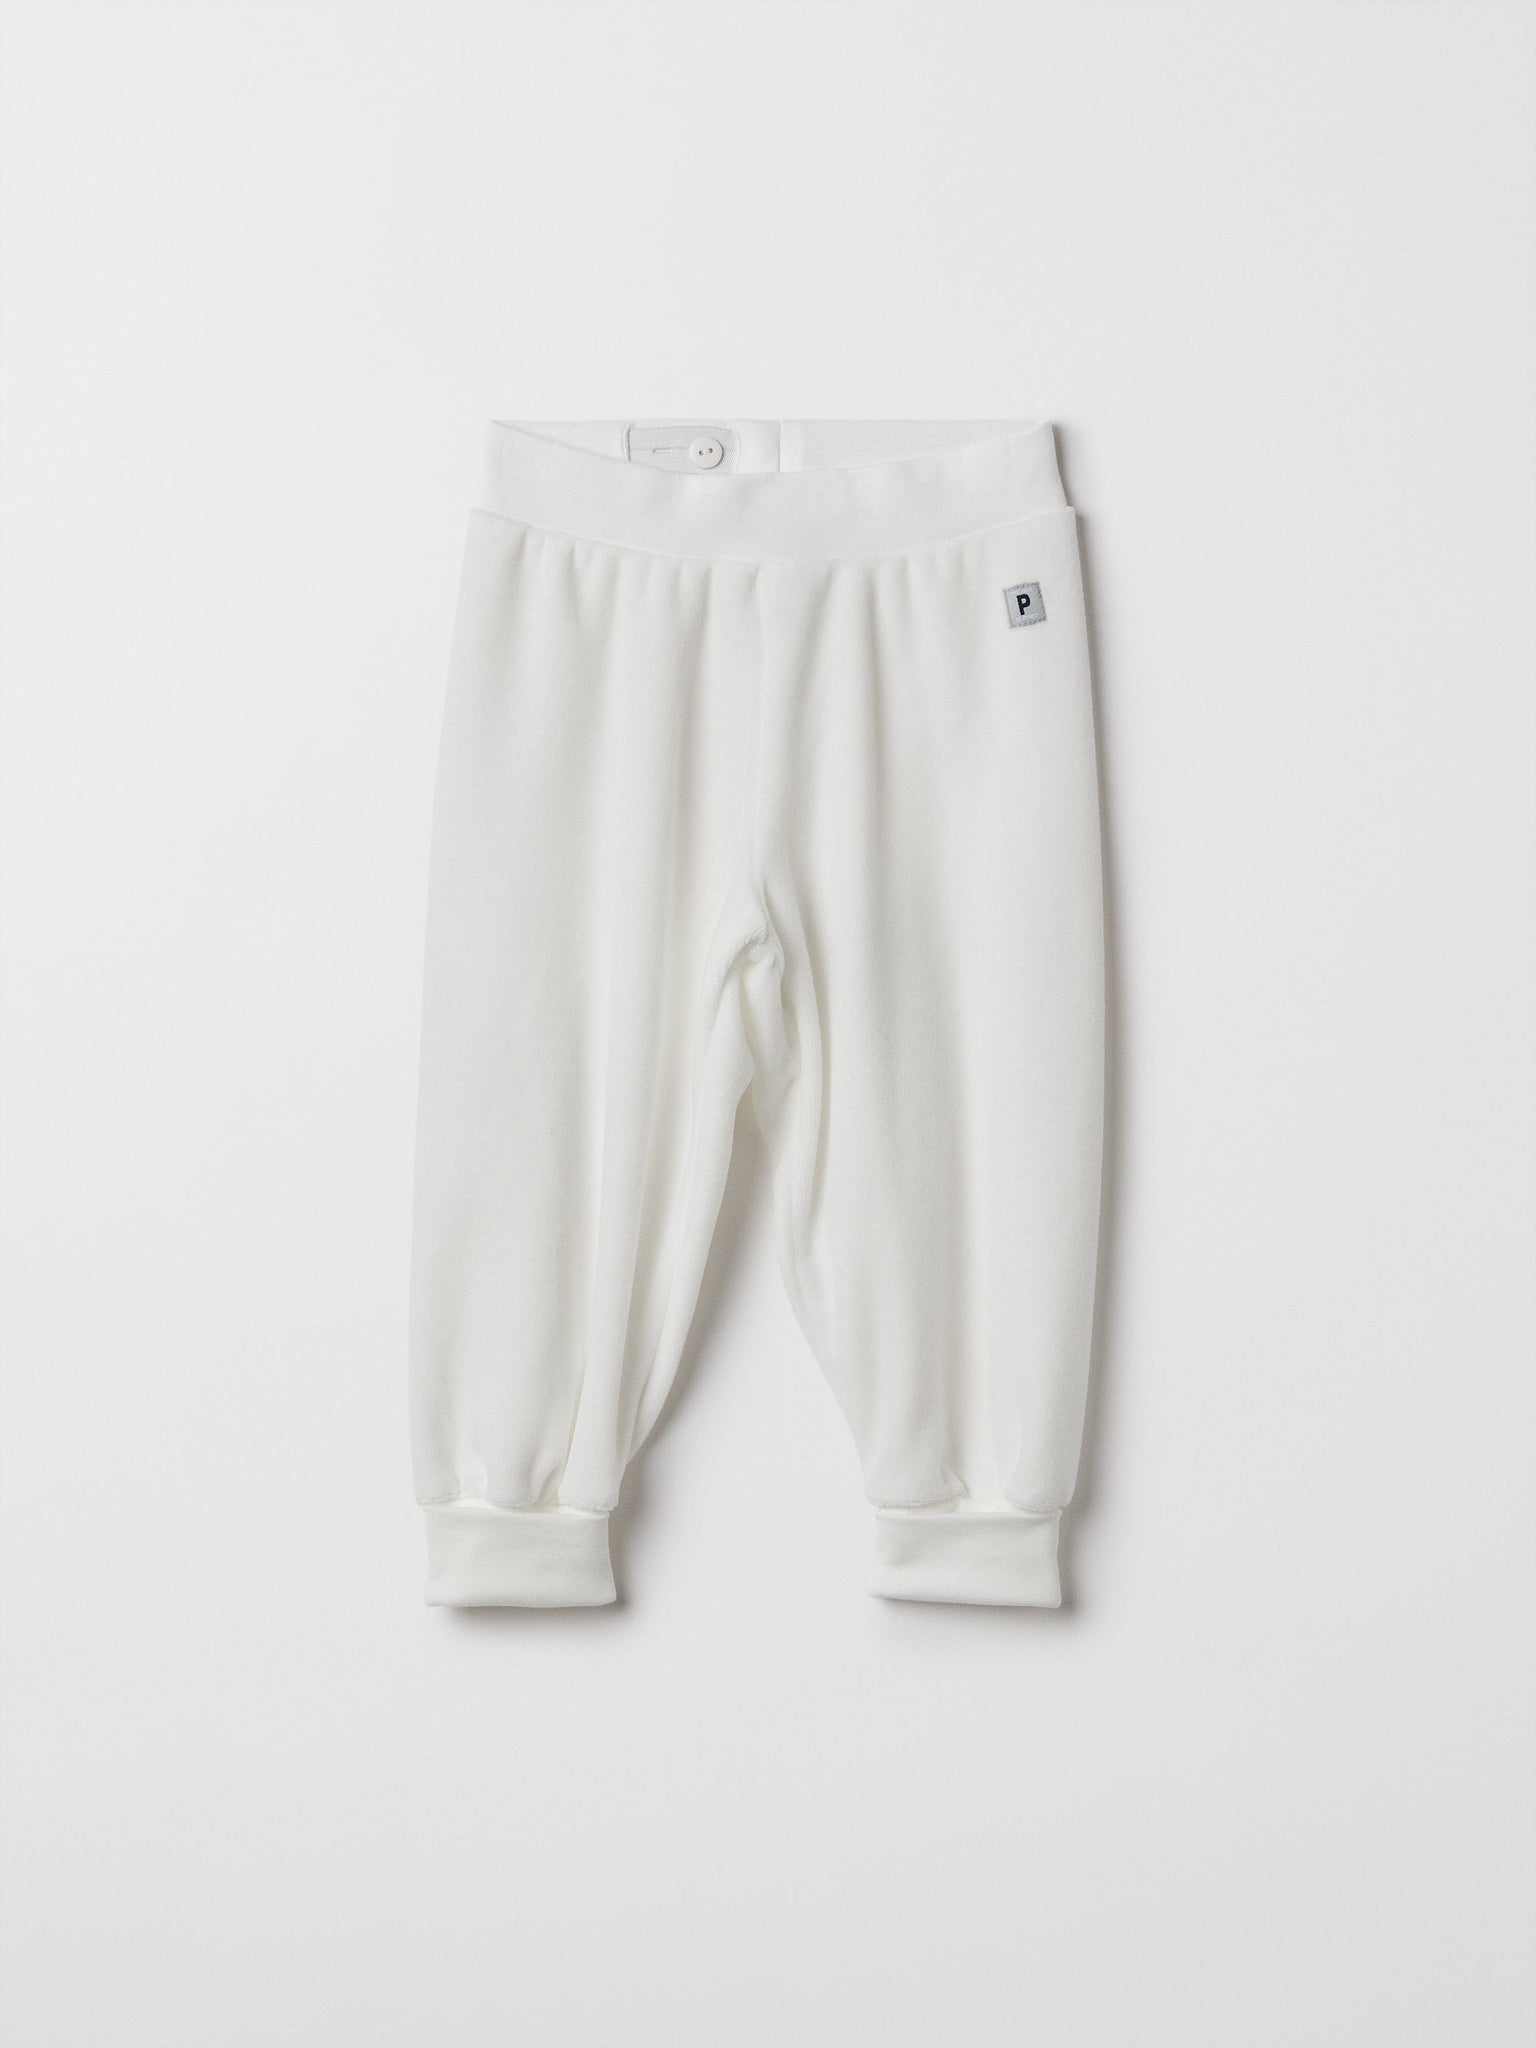 White Velour Baby Trousers from the Polarn O. Pyret baby collection. Nordic baby clothes made from sustainable sources.